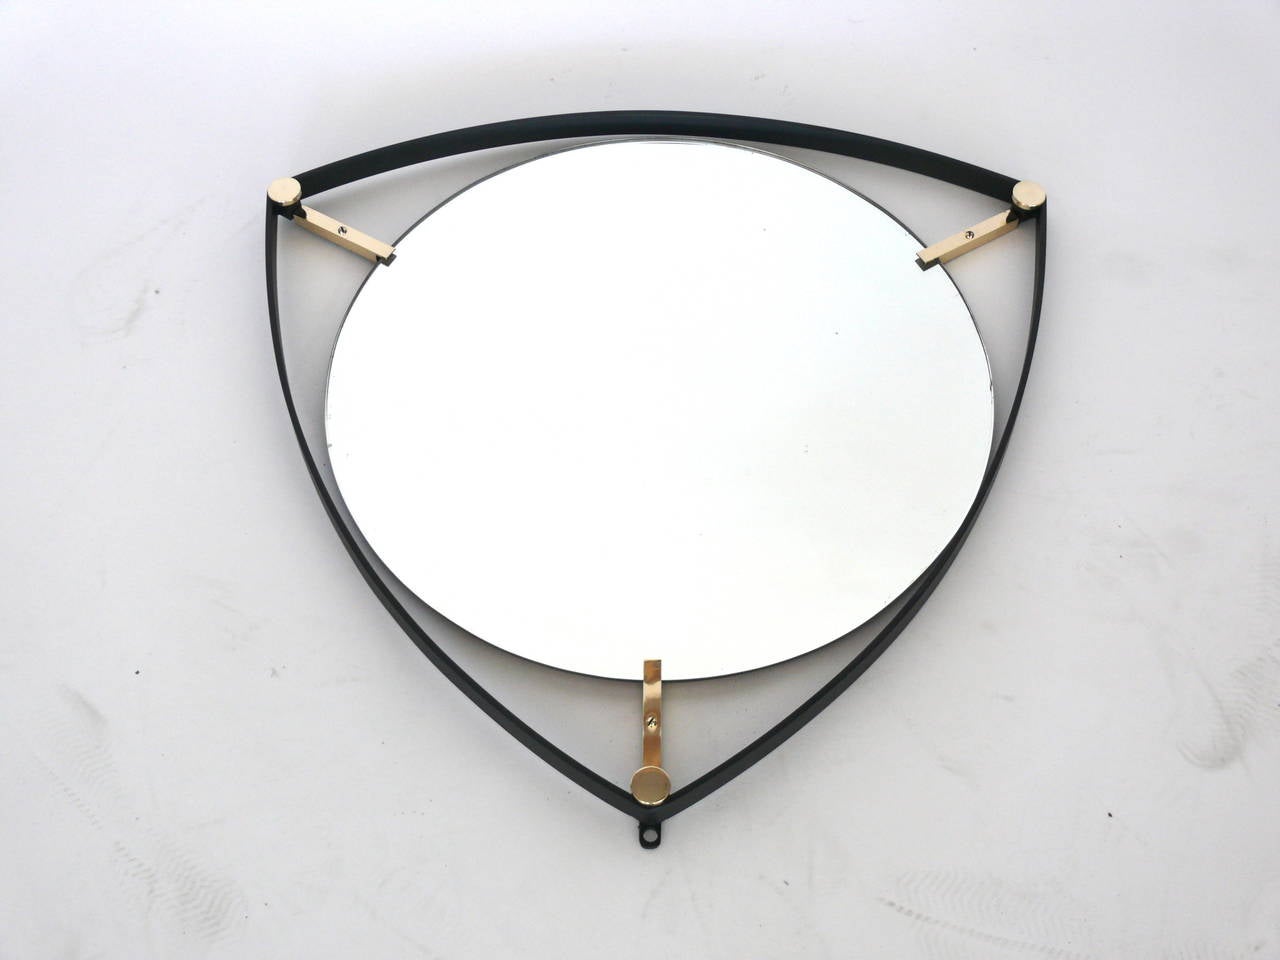 Handsome Italian mirror with triangular iron frame. Circular glass floats within the frame, suspended by three brass tabs. Newly produced from a vintage piece.